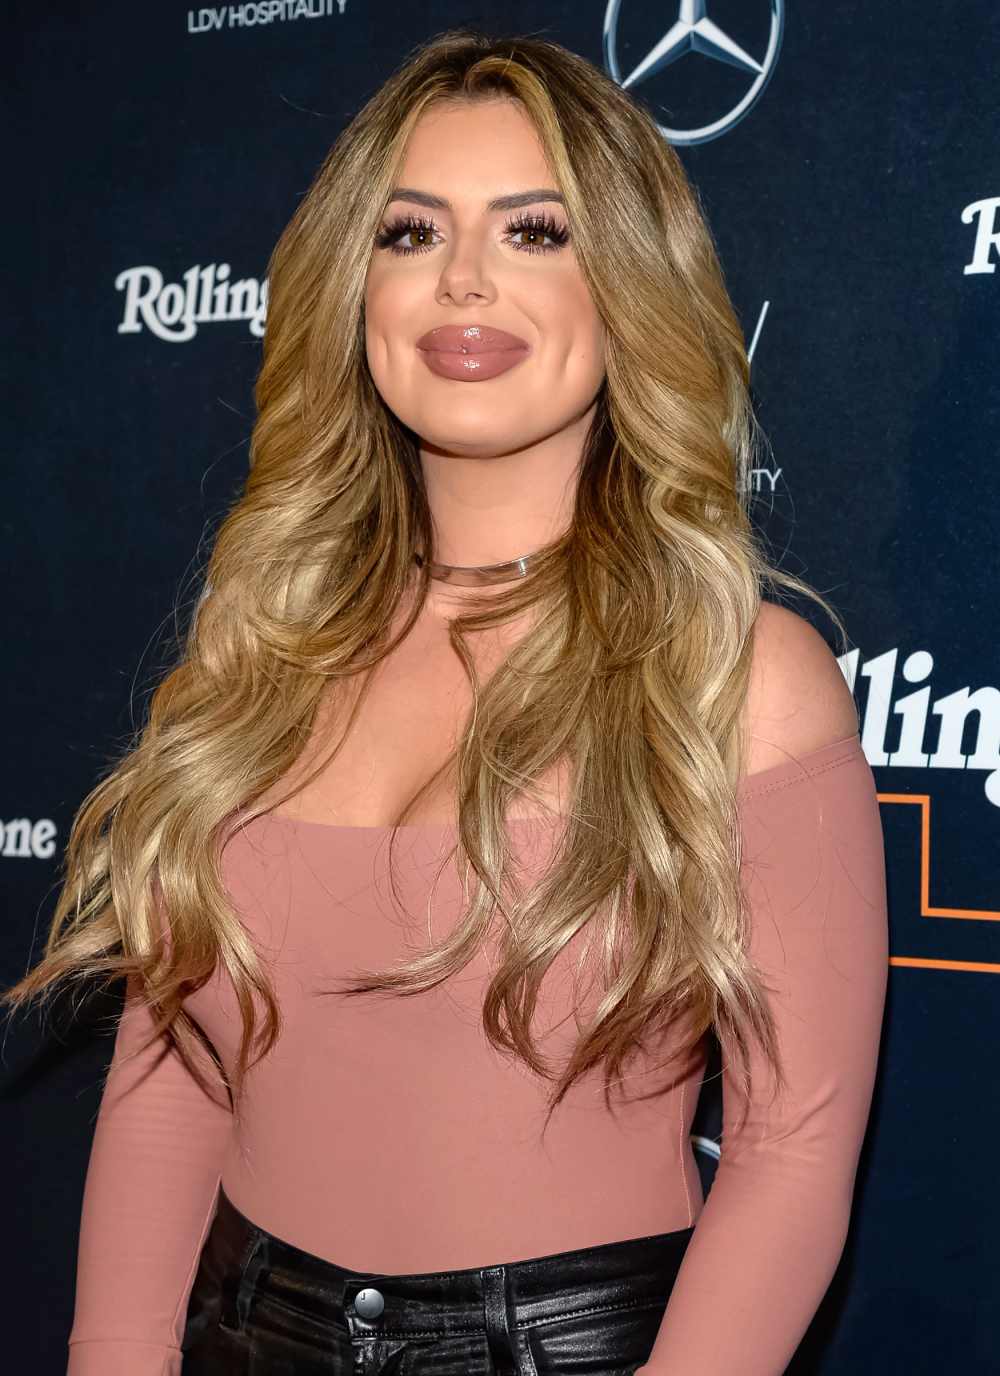 Why Brielle Biermann Wishes Her Friends Said Her Lip Fillers ‘Looked Crazy’